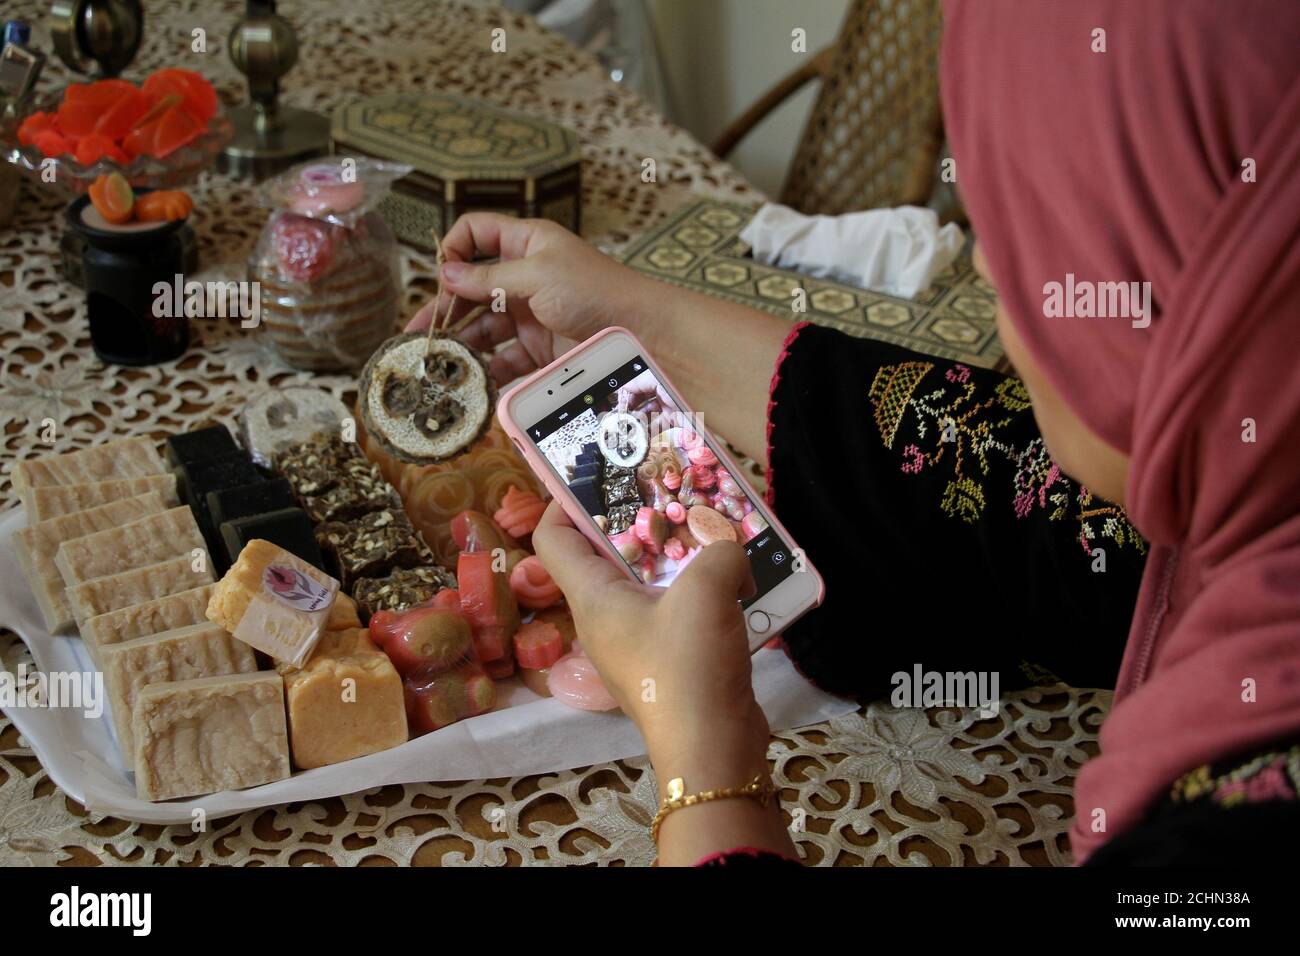 Gaza. 12th Sep, 2020. Asmaa Yassin takes photos of the soaps she makes to sell online at her house in Gaza City, on Sept. 12, 2020. Gazans have resorted to online shopping to buy necessities during the lockdown amid the COVID-19 outbreak. Credit: Rizek Abdeljawad/Xinhua/Alamy Live News Stock Photo